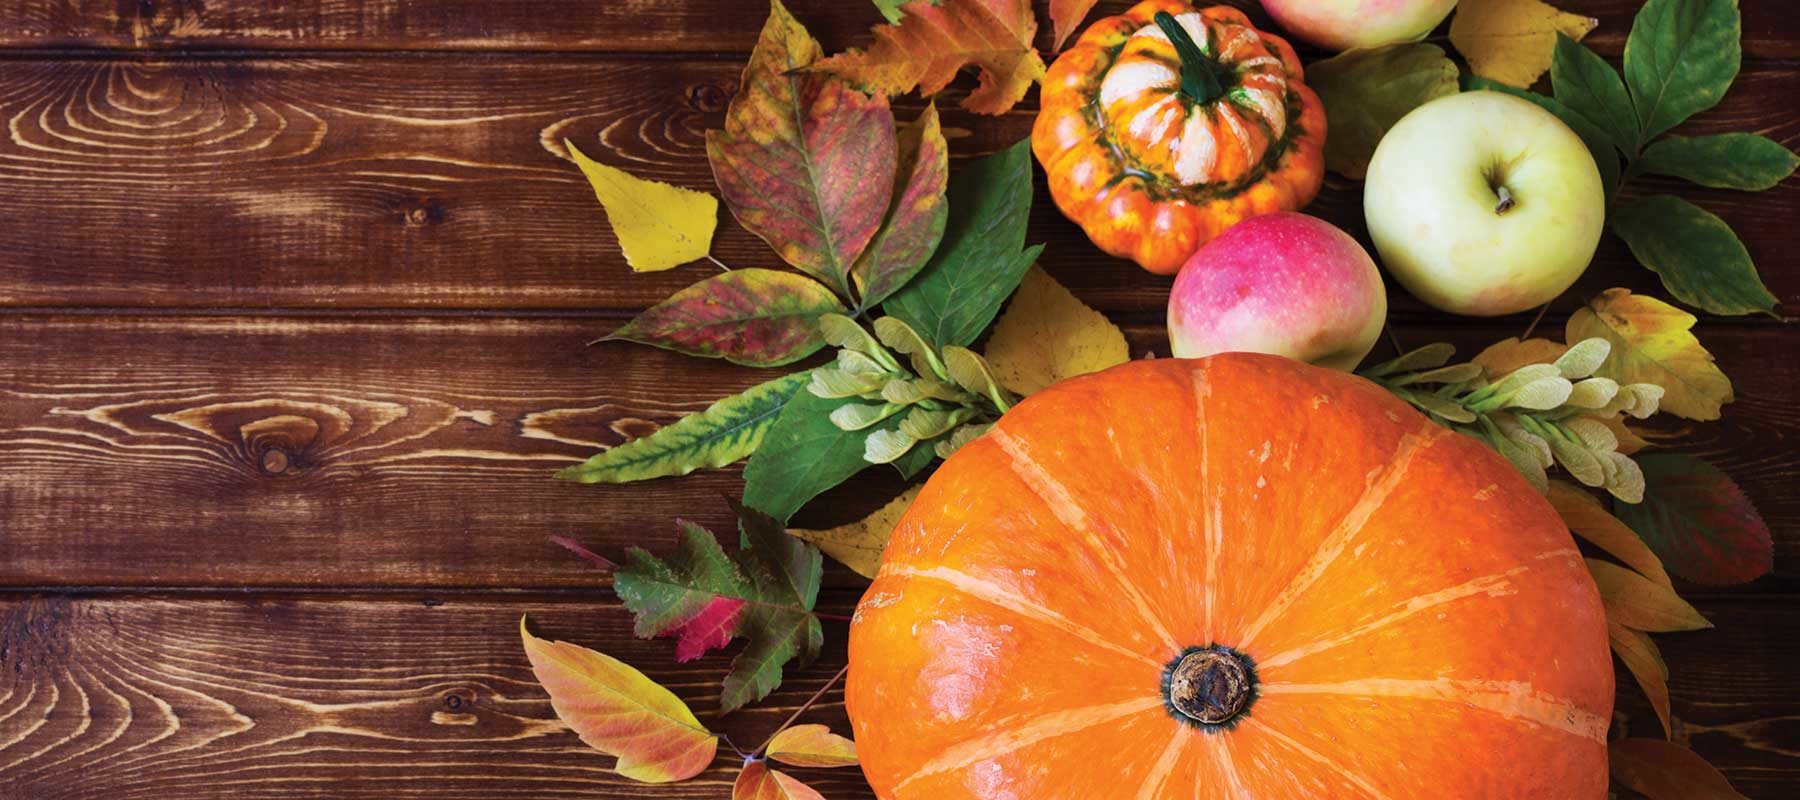 Rustic fall decor with pumpkin, apples